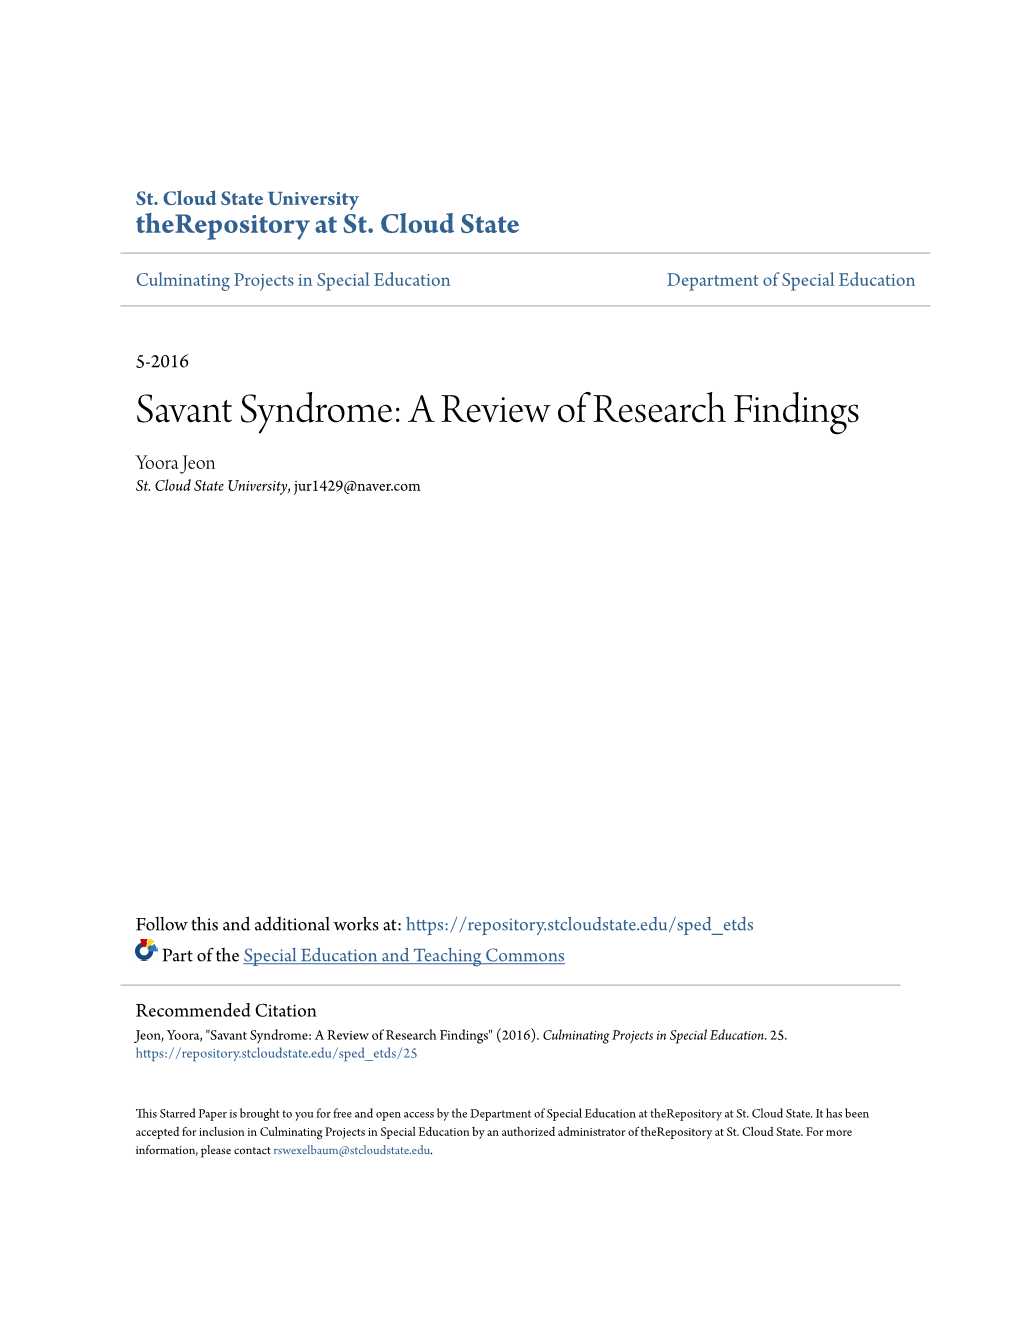 Savant Syndrome: a Review of Research Findings Yoora Jeon St